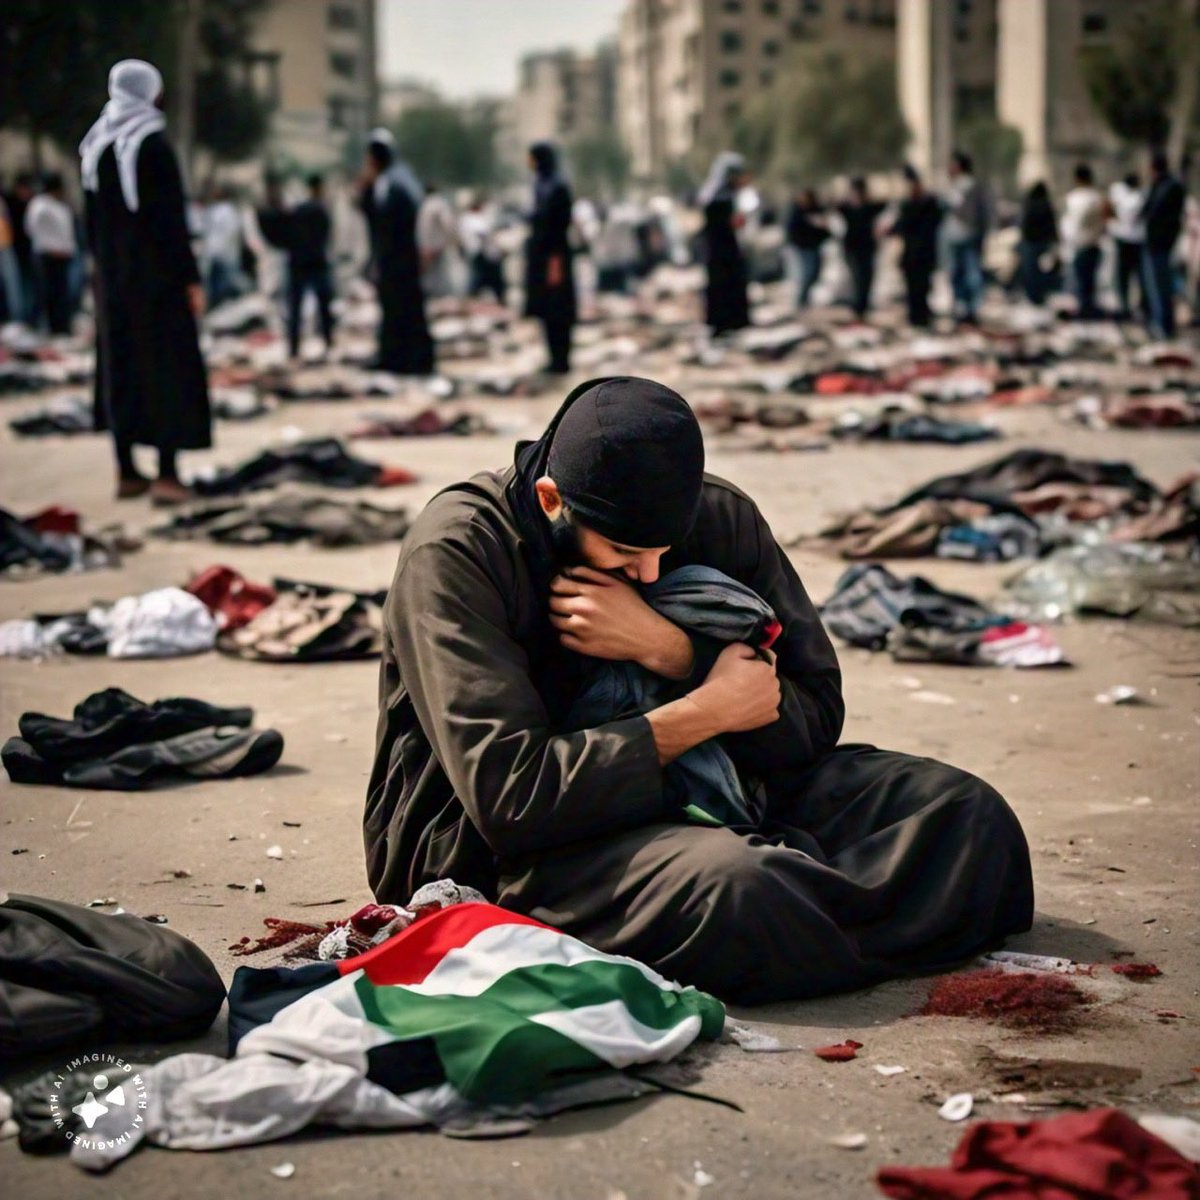 'If 30, 000 martyrs, 70, 000 injured and 2 million homeless Palestinians couldn't wake up the Ummah, what impact will my words make? What more do I say, and to whom?” - Sheikh Mahmoud Al Hasanat 💔🇵🇸 #FreePalestine #AllEyesOnPalestine